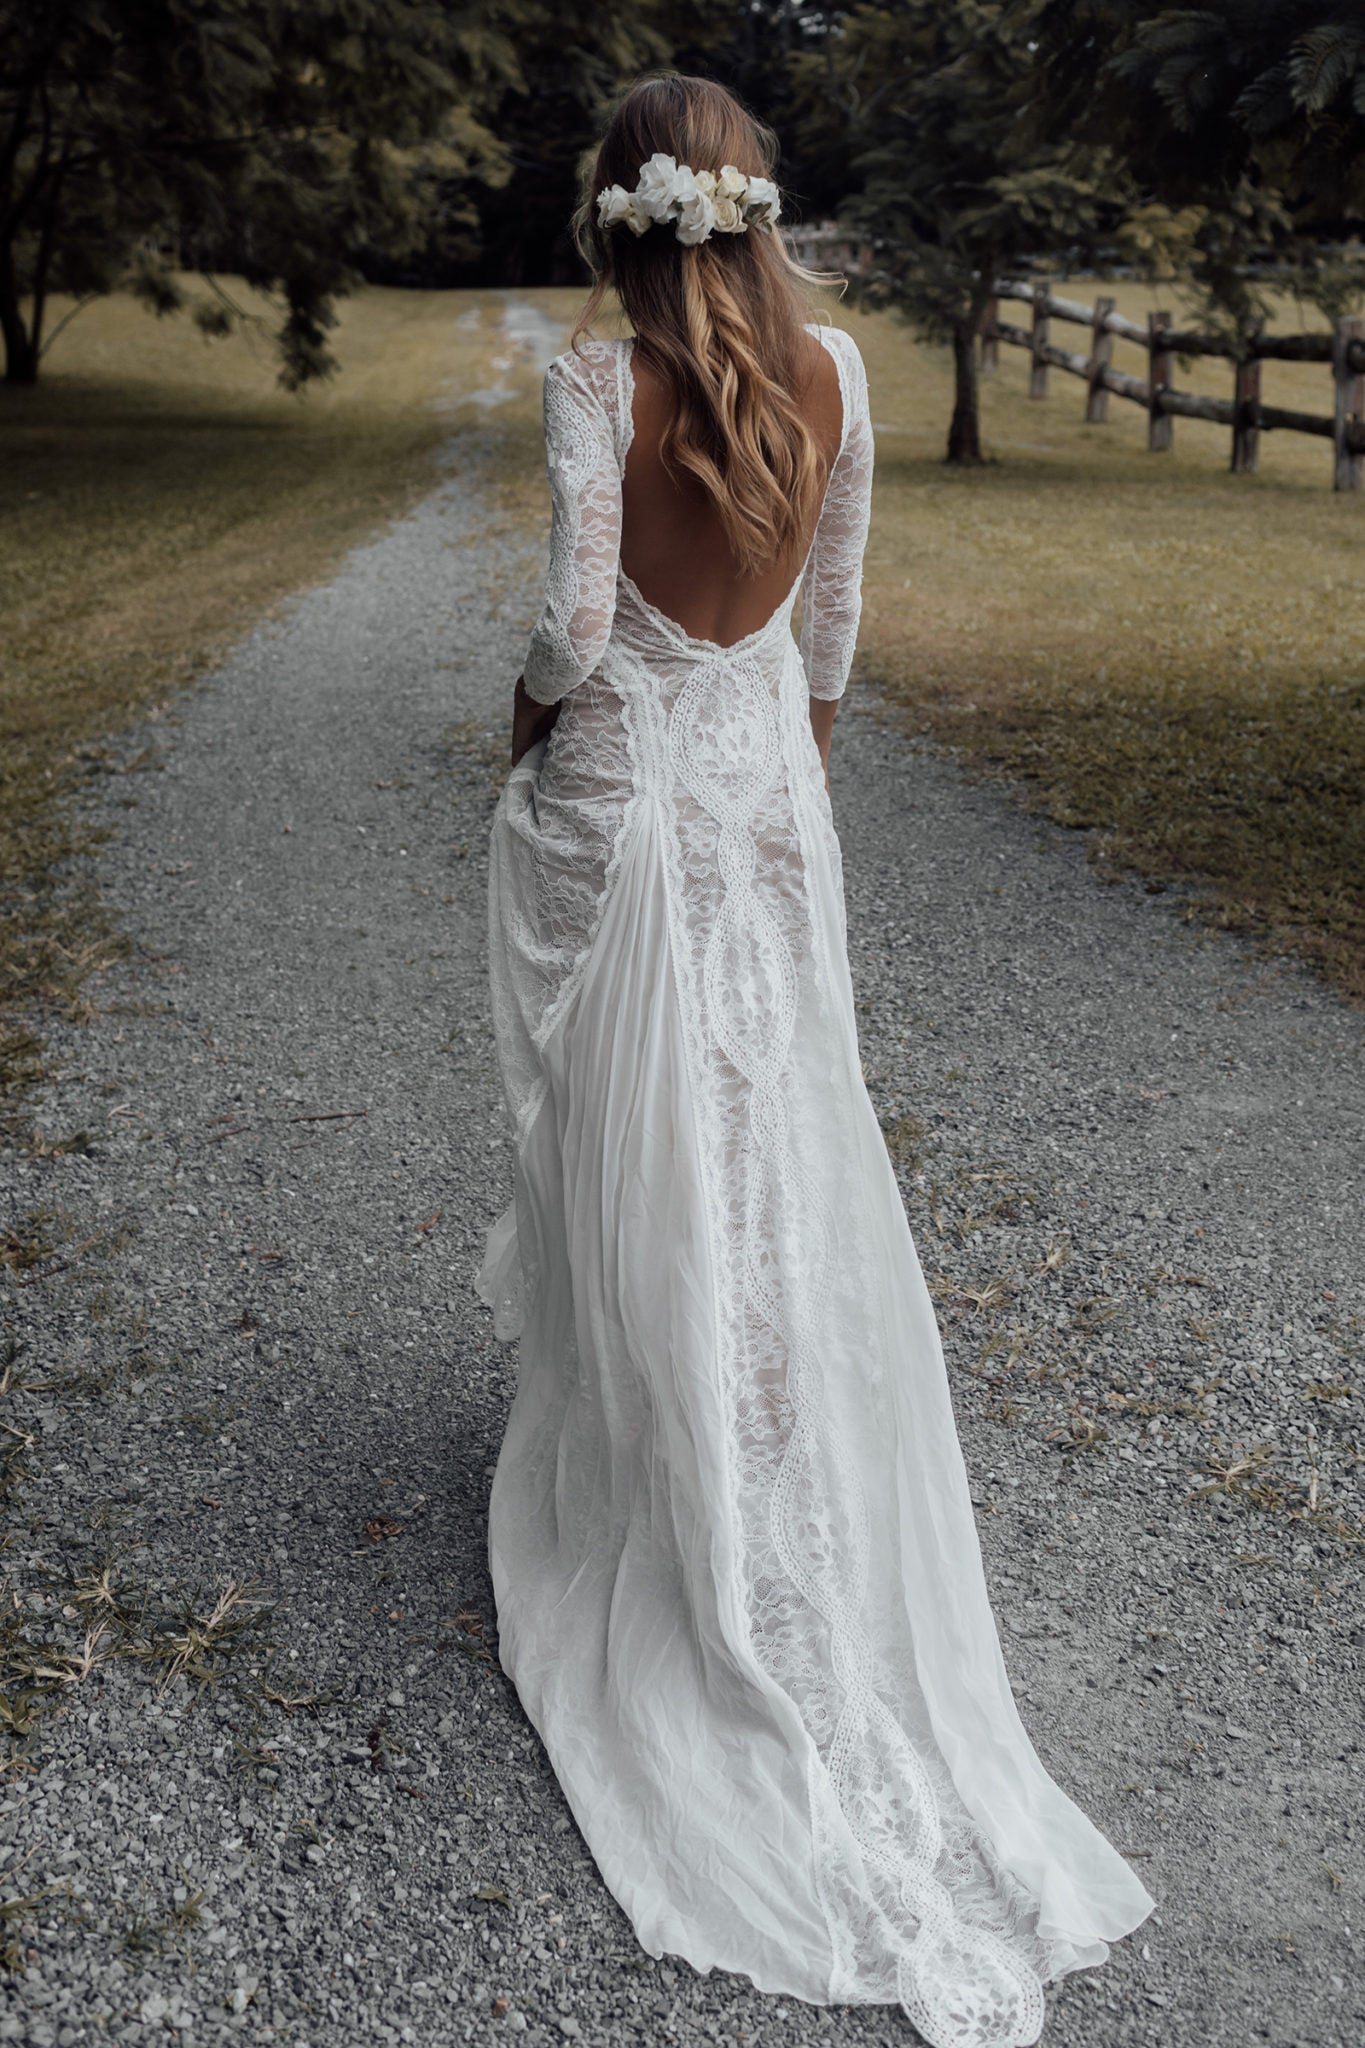 15 Backless Wedding Dresses To Obsess Over